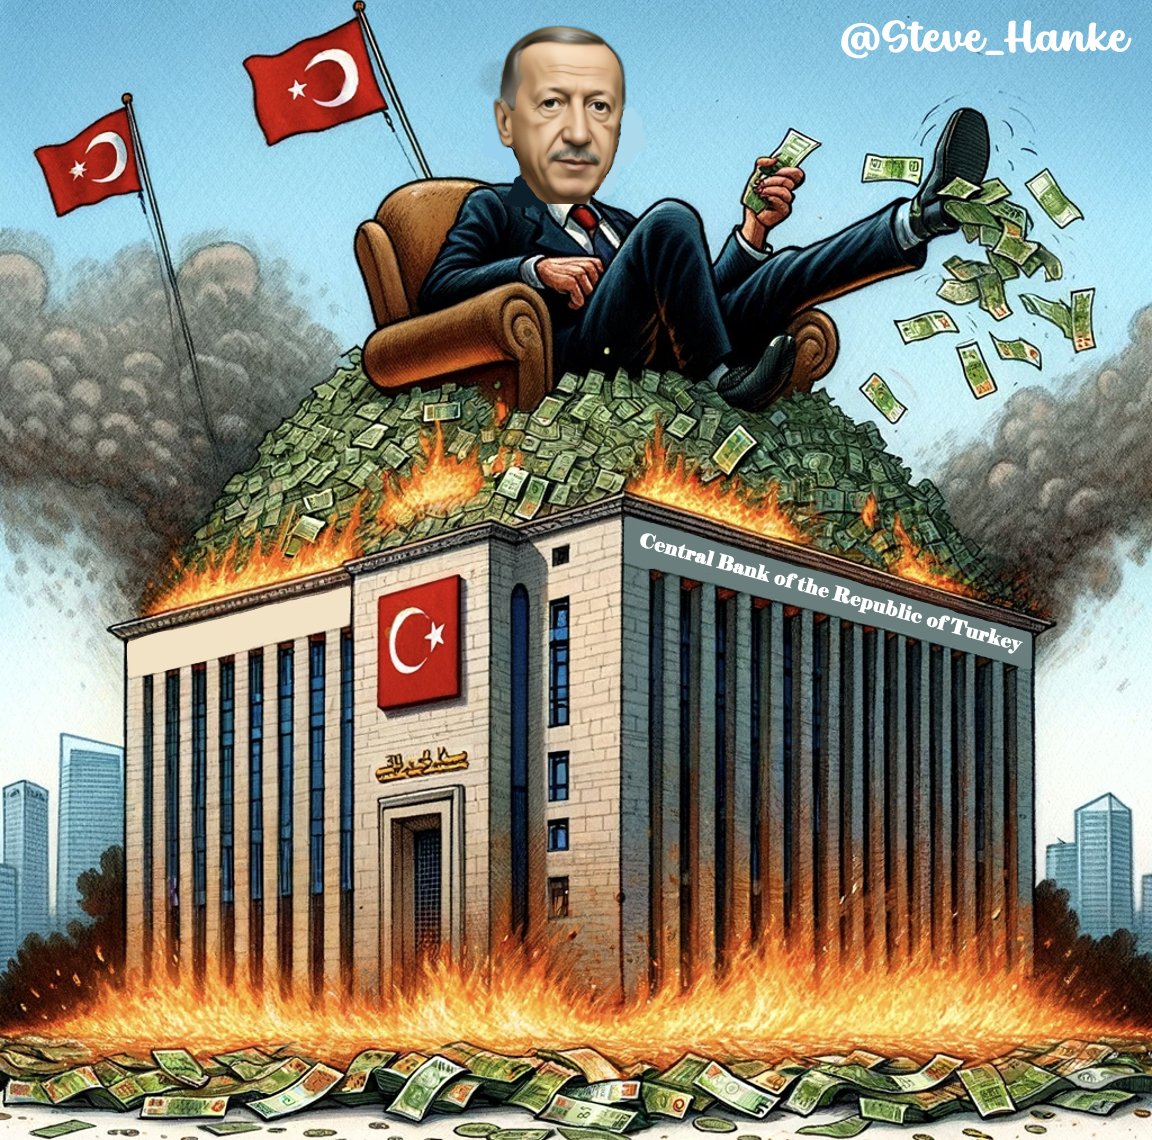 #TurkeyWatch🇹🇷: Pres. Erdogan = BURN, BABY! BURN!

TUR’s money supply (M3) SURGES at ~65%/yr, nearly 5.3x Hanke’s Golden Growth rate, a rate consistent with hitting the CBRT’s 5%/yr. inflation target.

No wonder TUR's inflation RAGES at 73%/yr, by my measure.